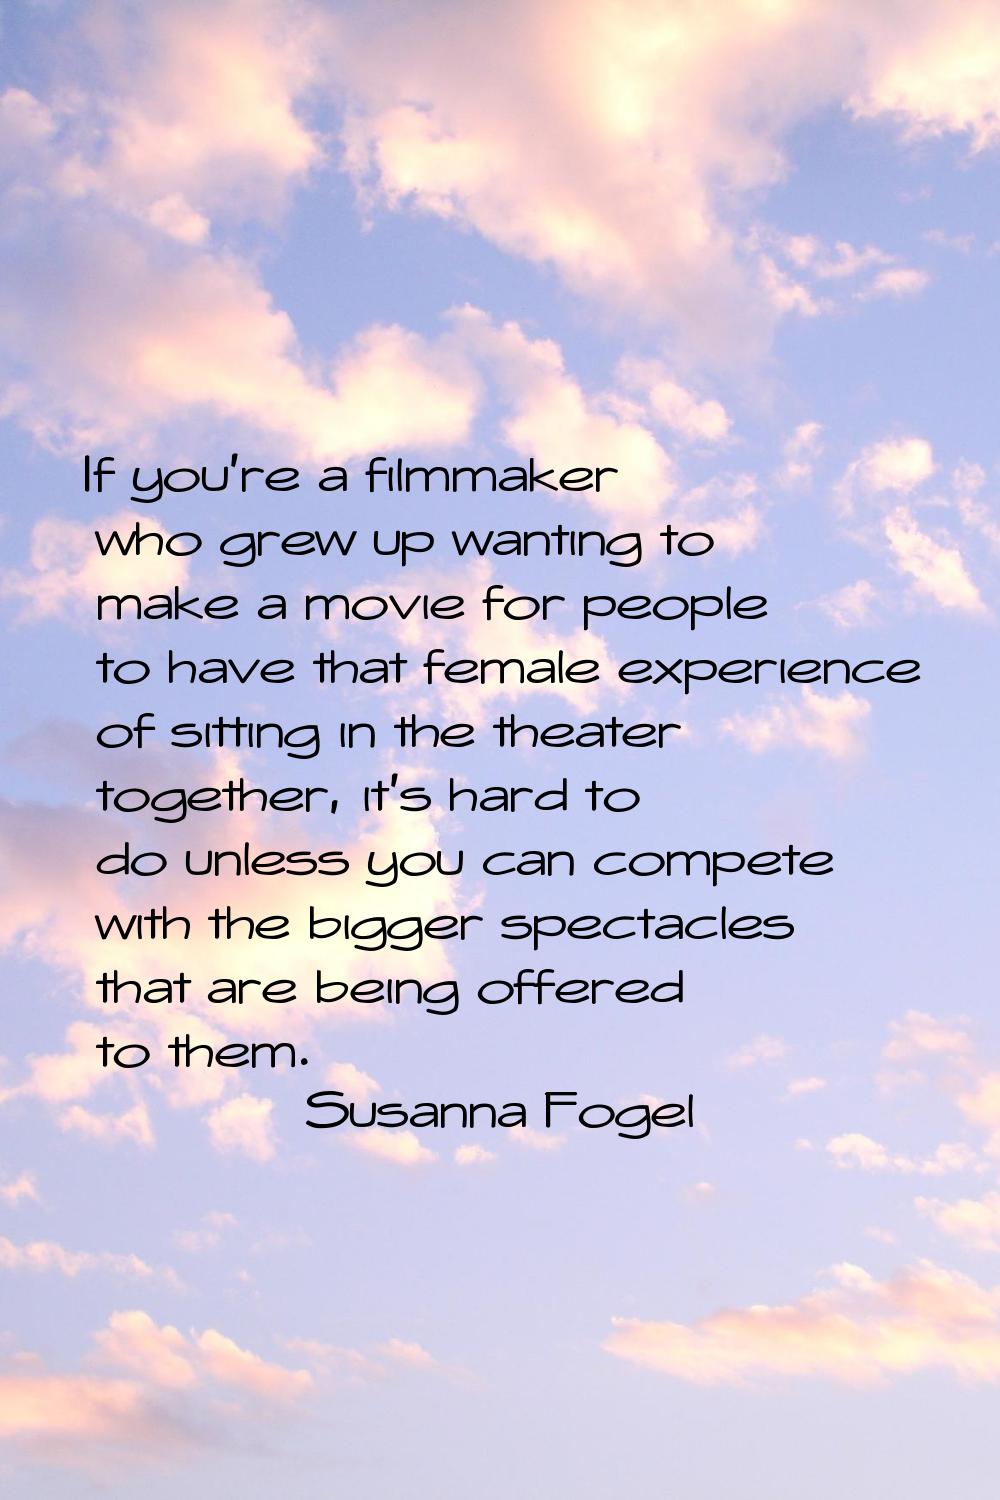 If you're a filmmaker who grew up wanting to make a movie for people to have that female experience